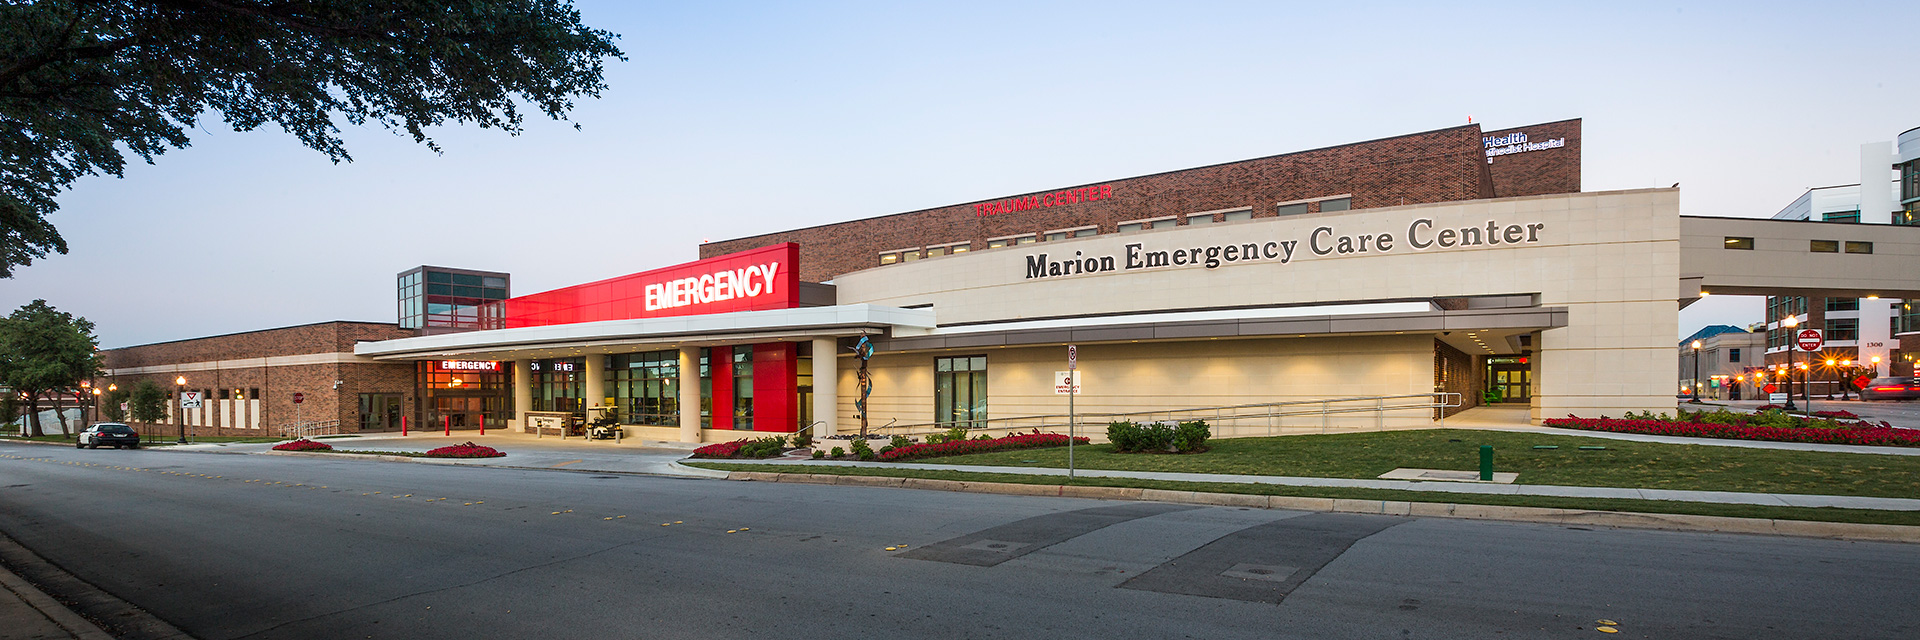 Marion Emergency Care Center